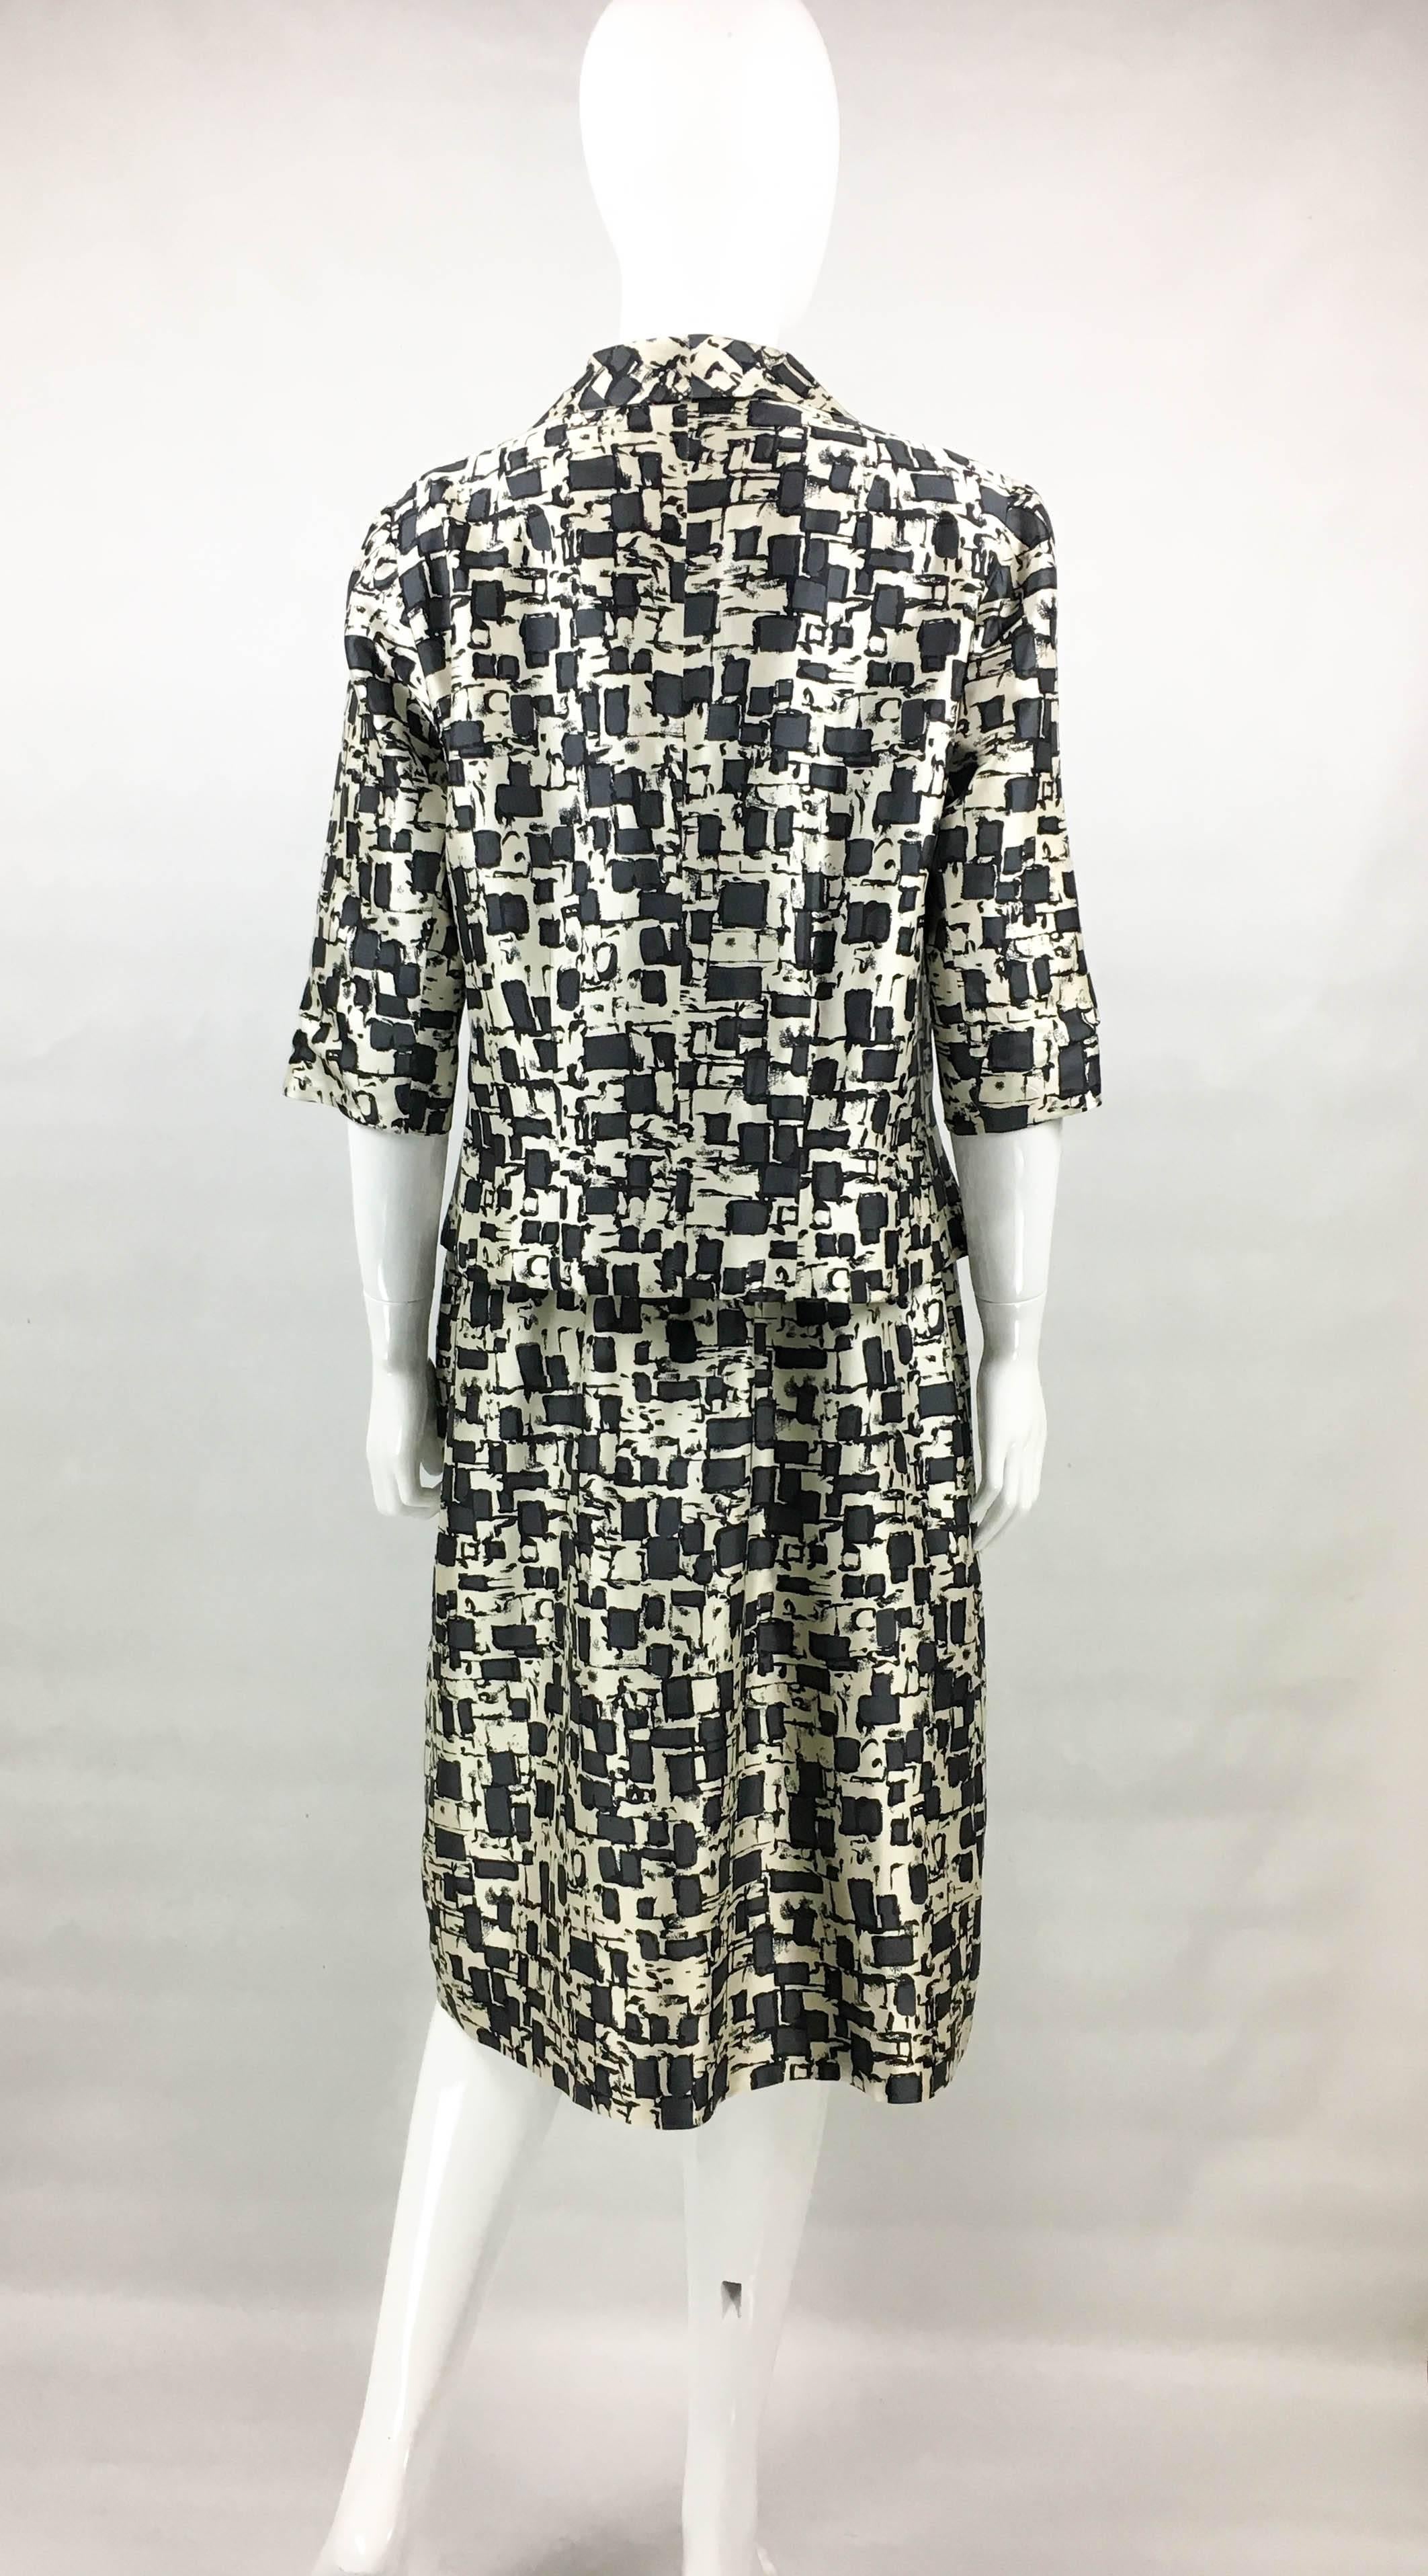 Dior by Marc Bohan Haute Couture Dress and Jacket Silk Ensemble, Spring 1968 In Excellent Condition In London, Chelsea